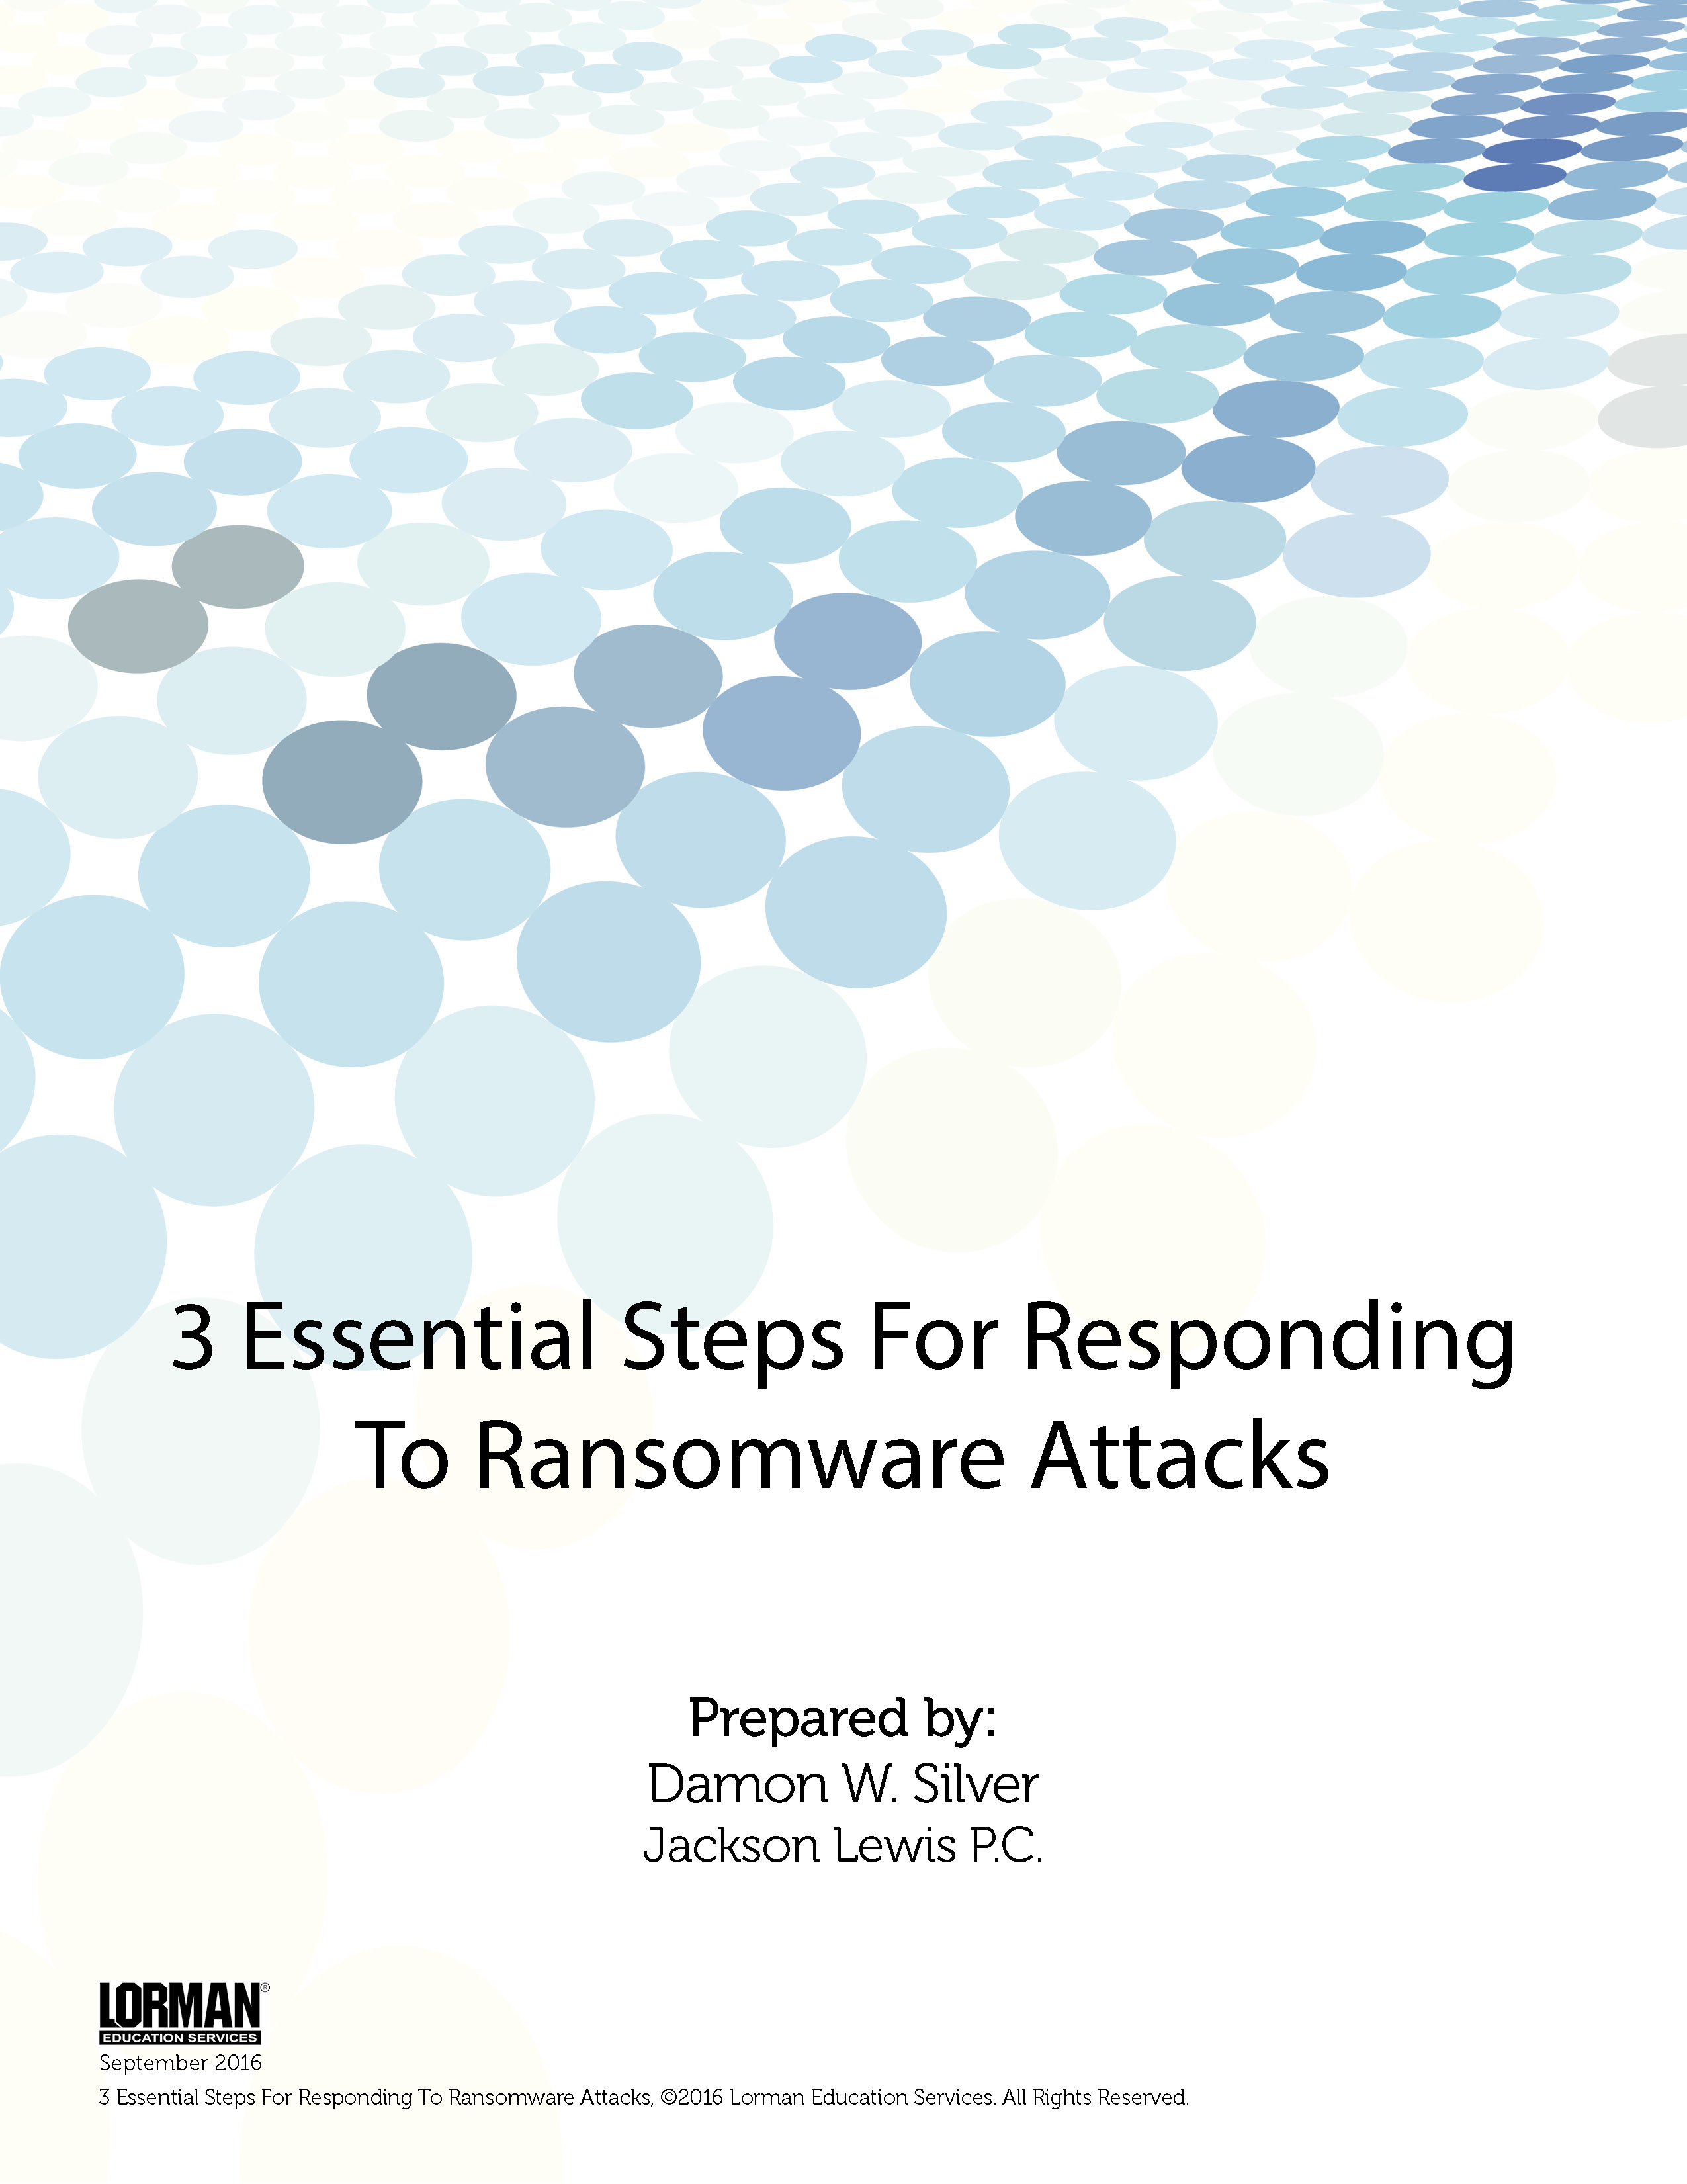 3 Essential Steps For Responding To Ransomware Attacks